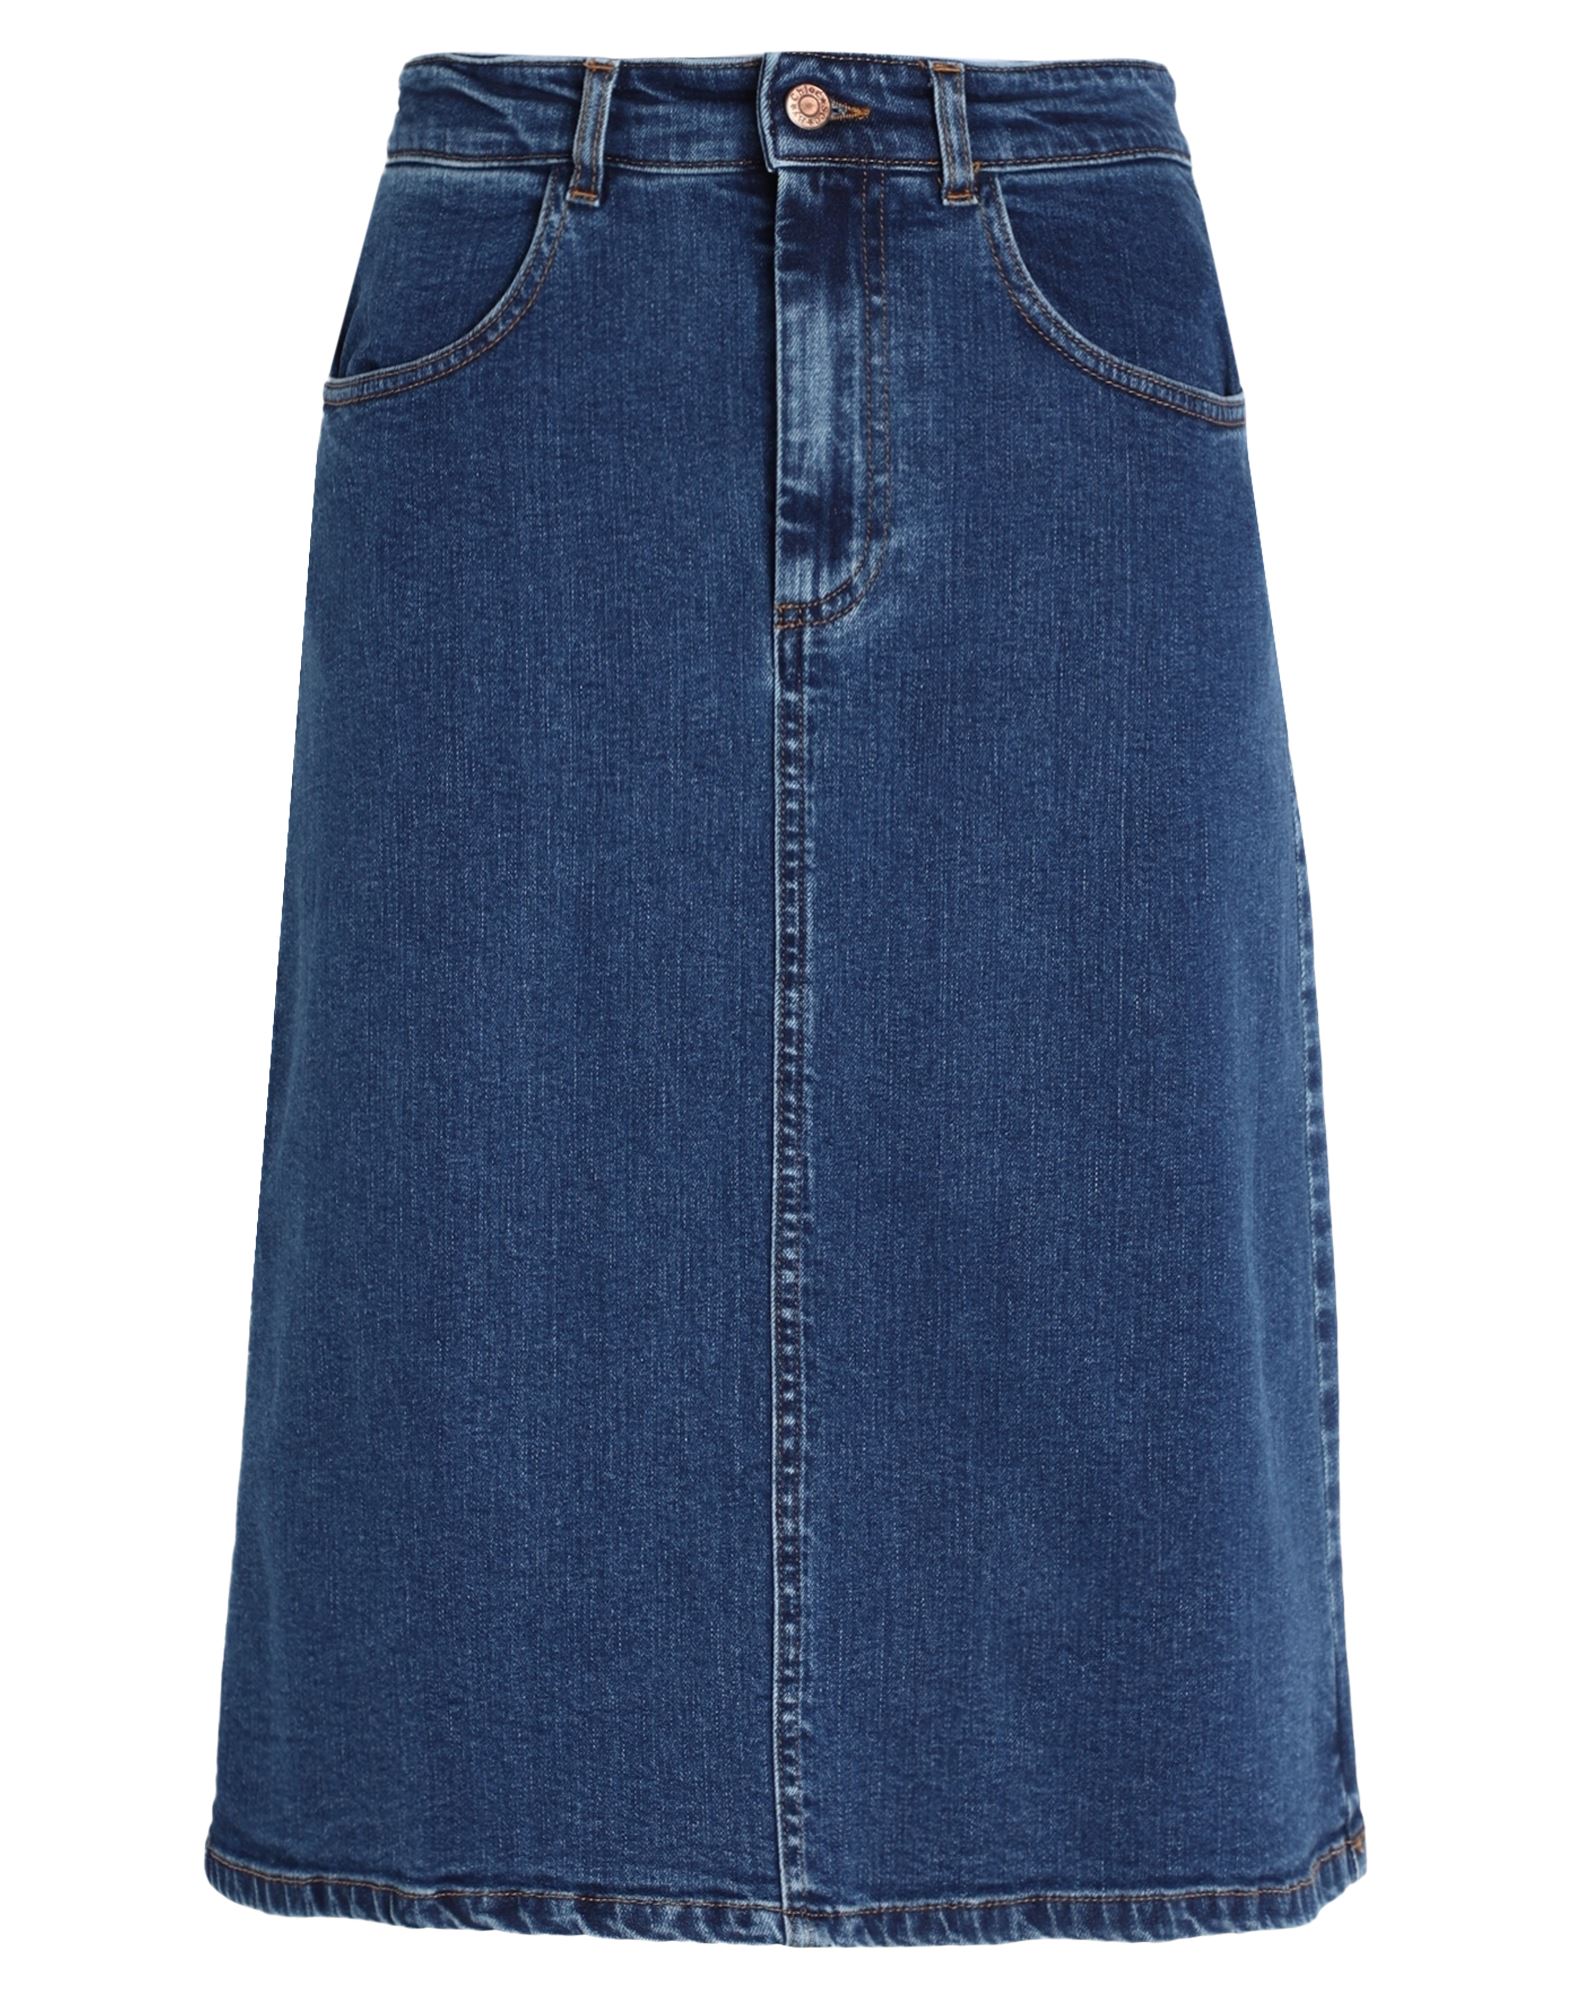 SEE BY CHLOÉ SEE BY CHLOÉ WOMAN DENIM SKIRT BLUE SIZE 6 COTTON, ELASTANE